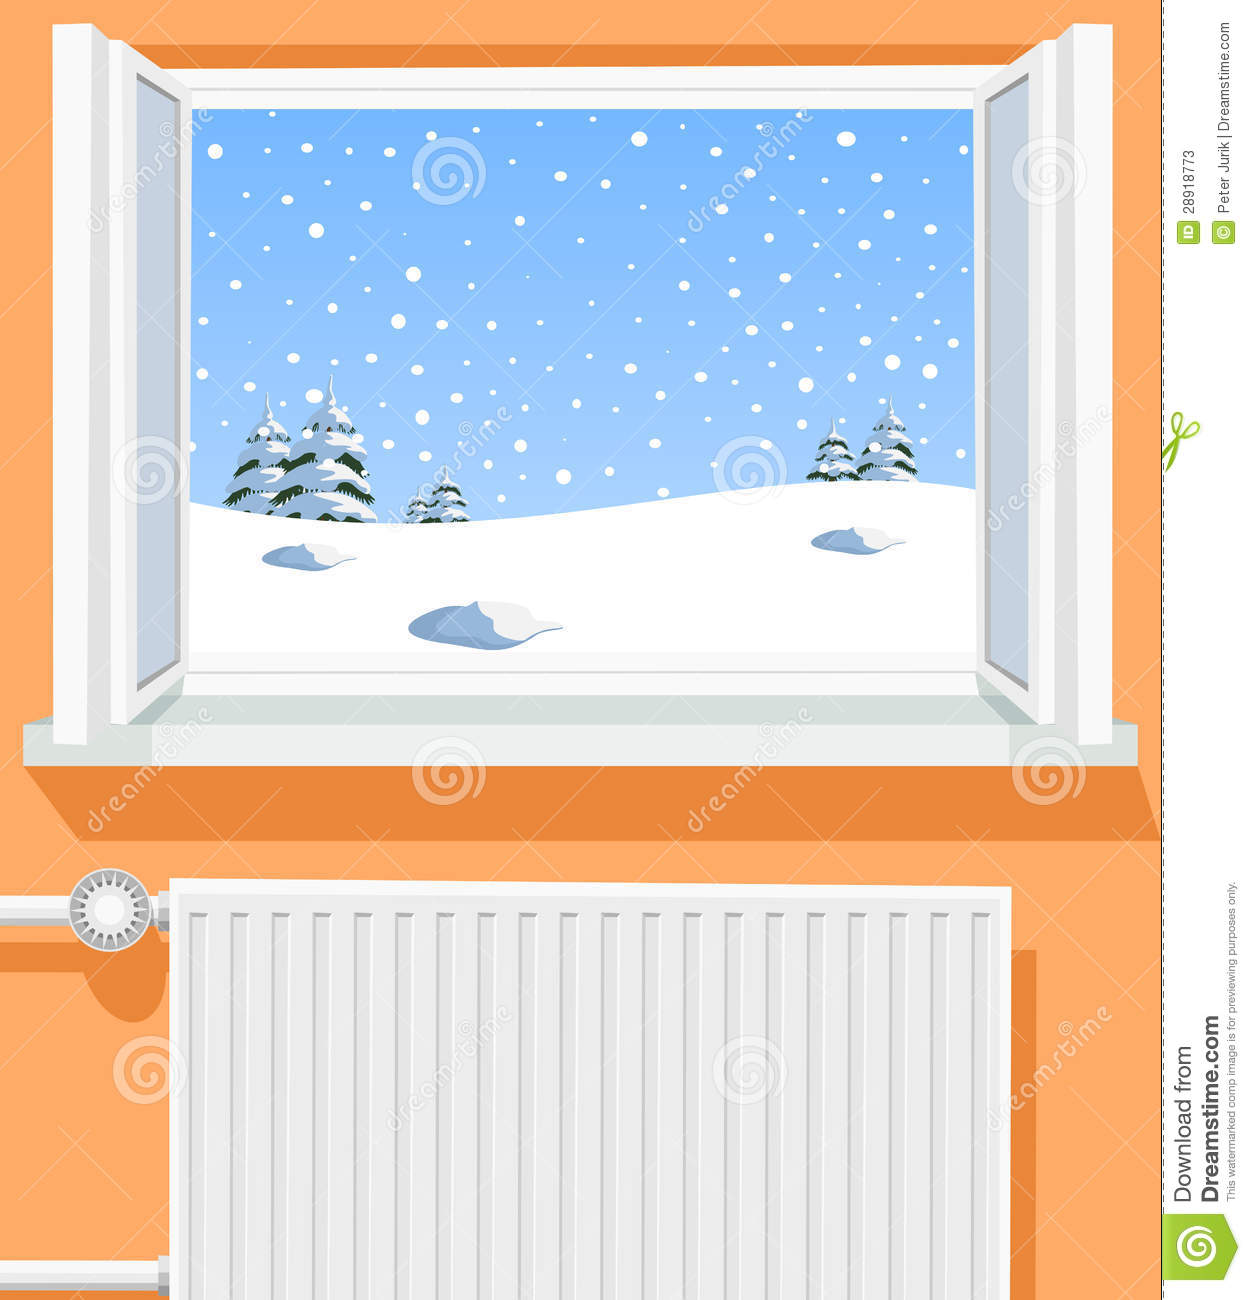 More Similar Stock Images Of   Winter Scene Through Opened Window